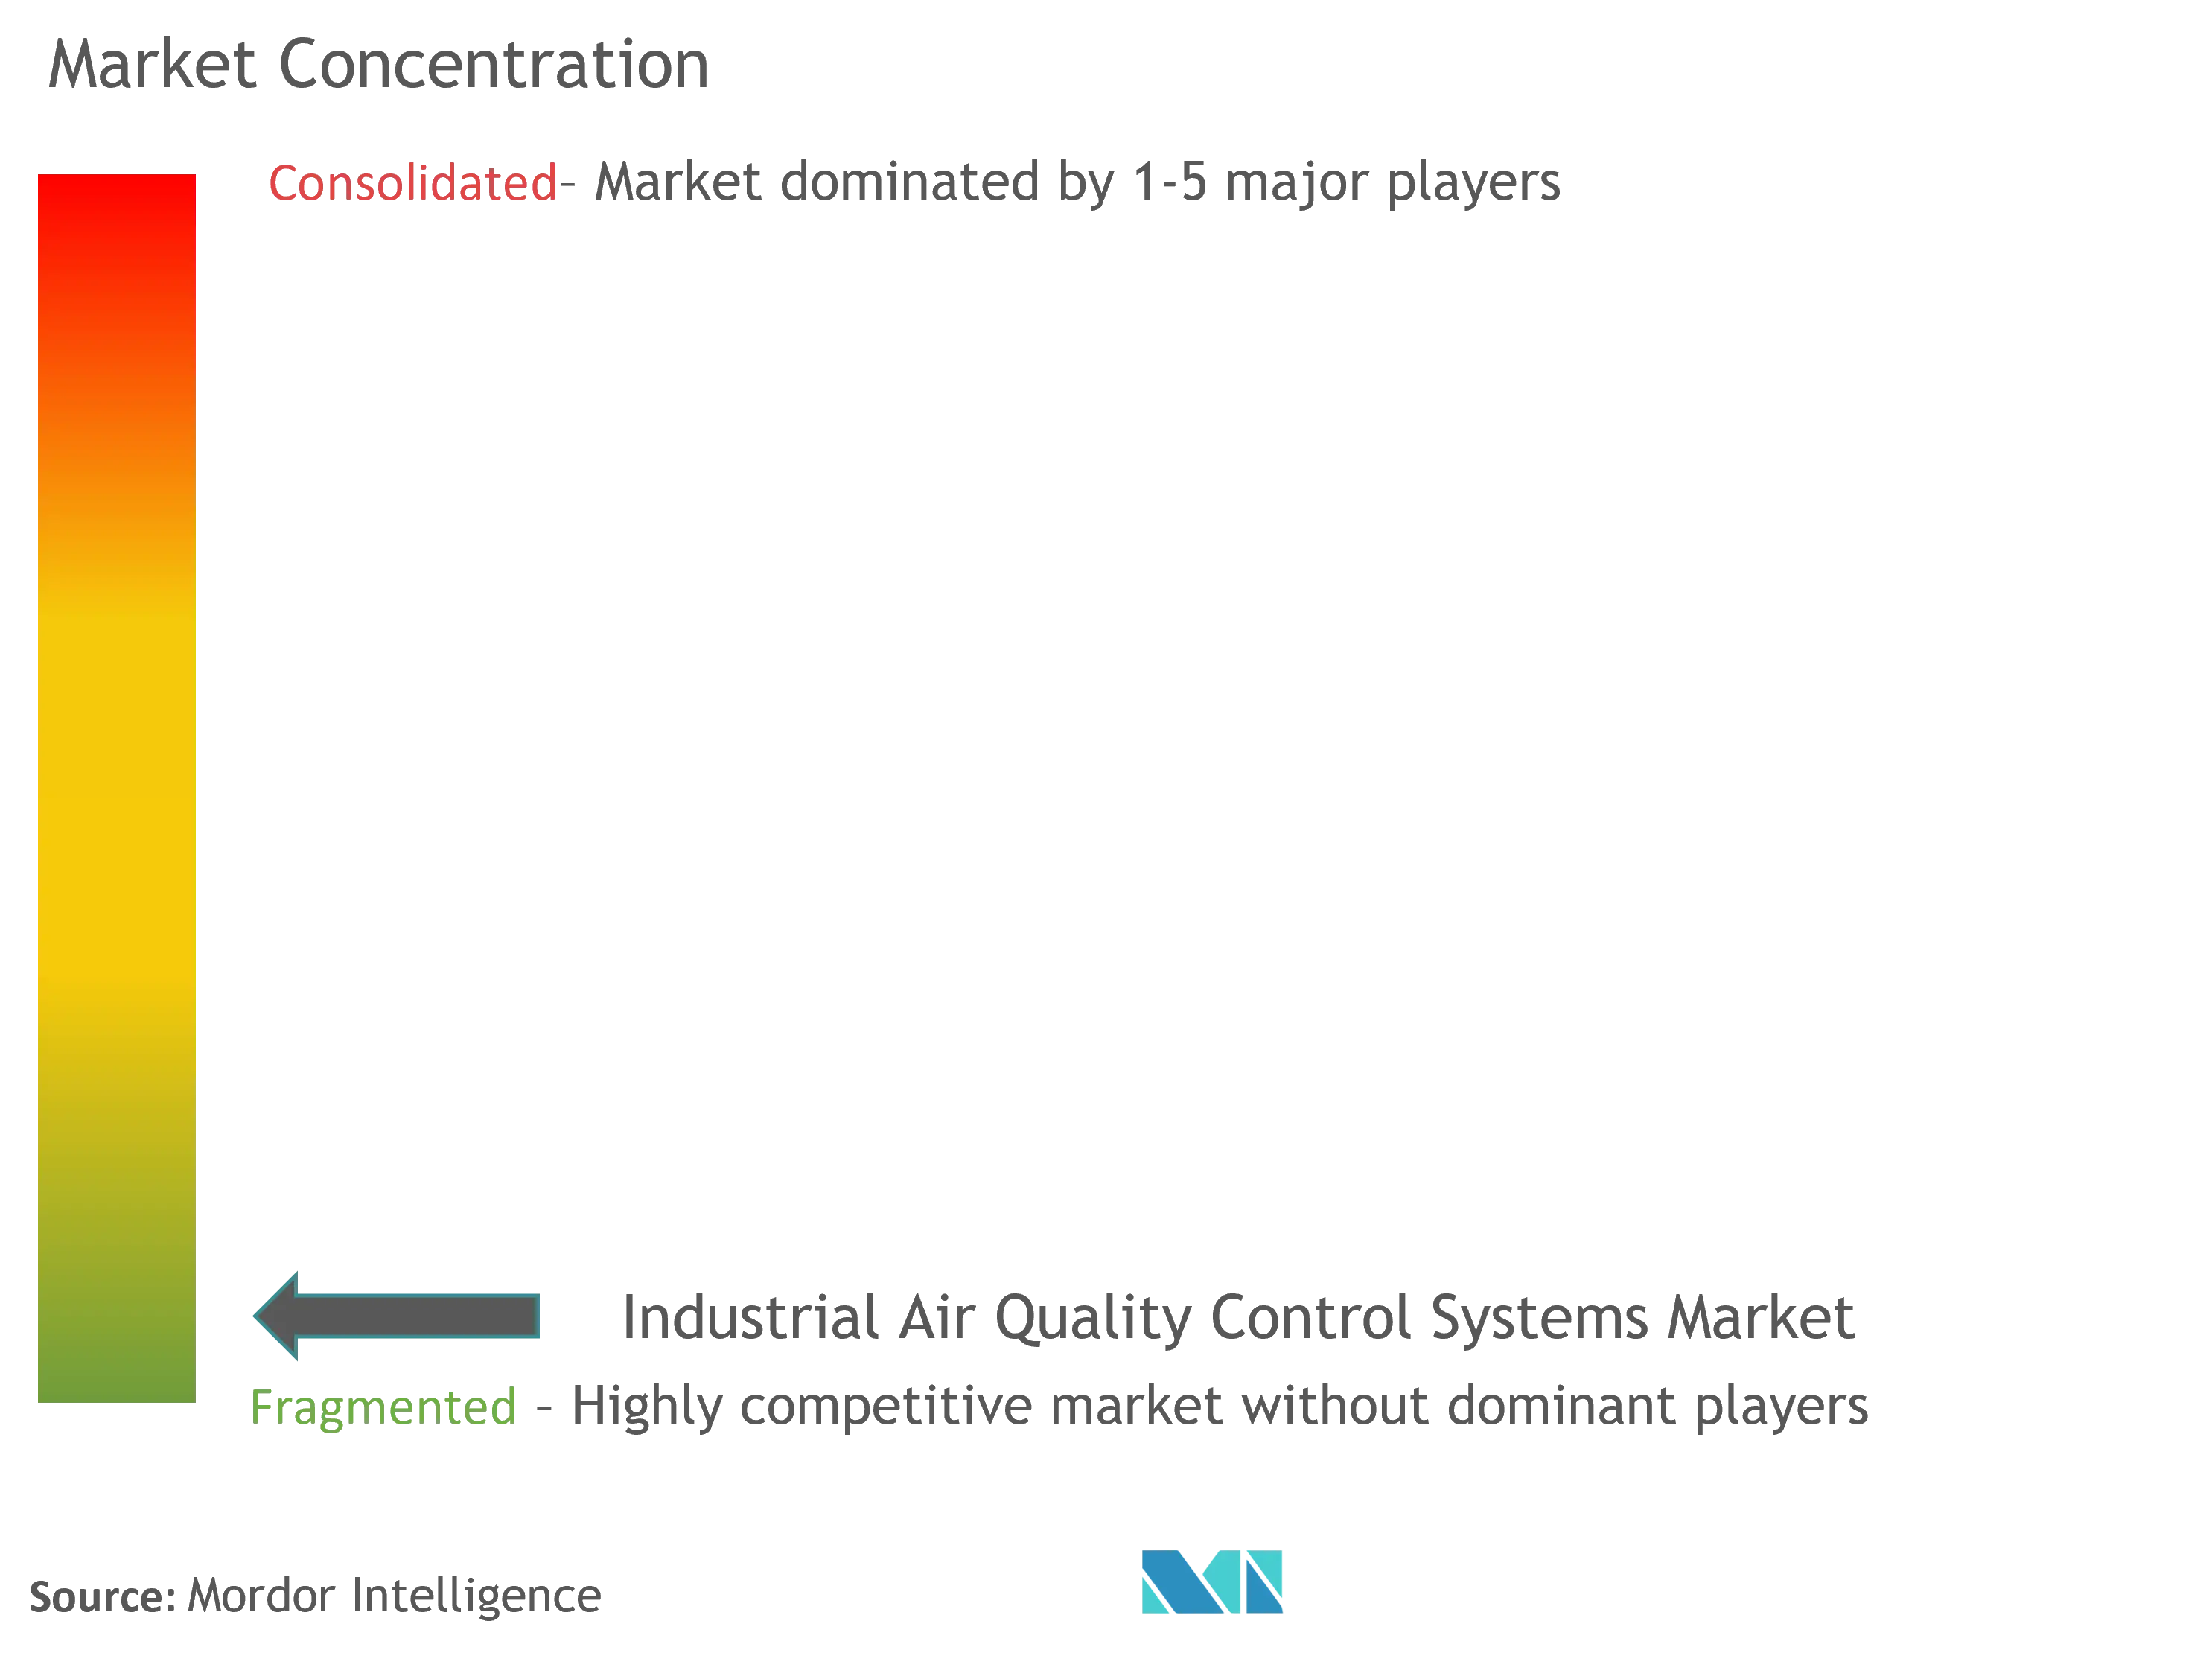 Industrial Air Quality Control Systems Market Concentration